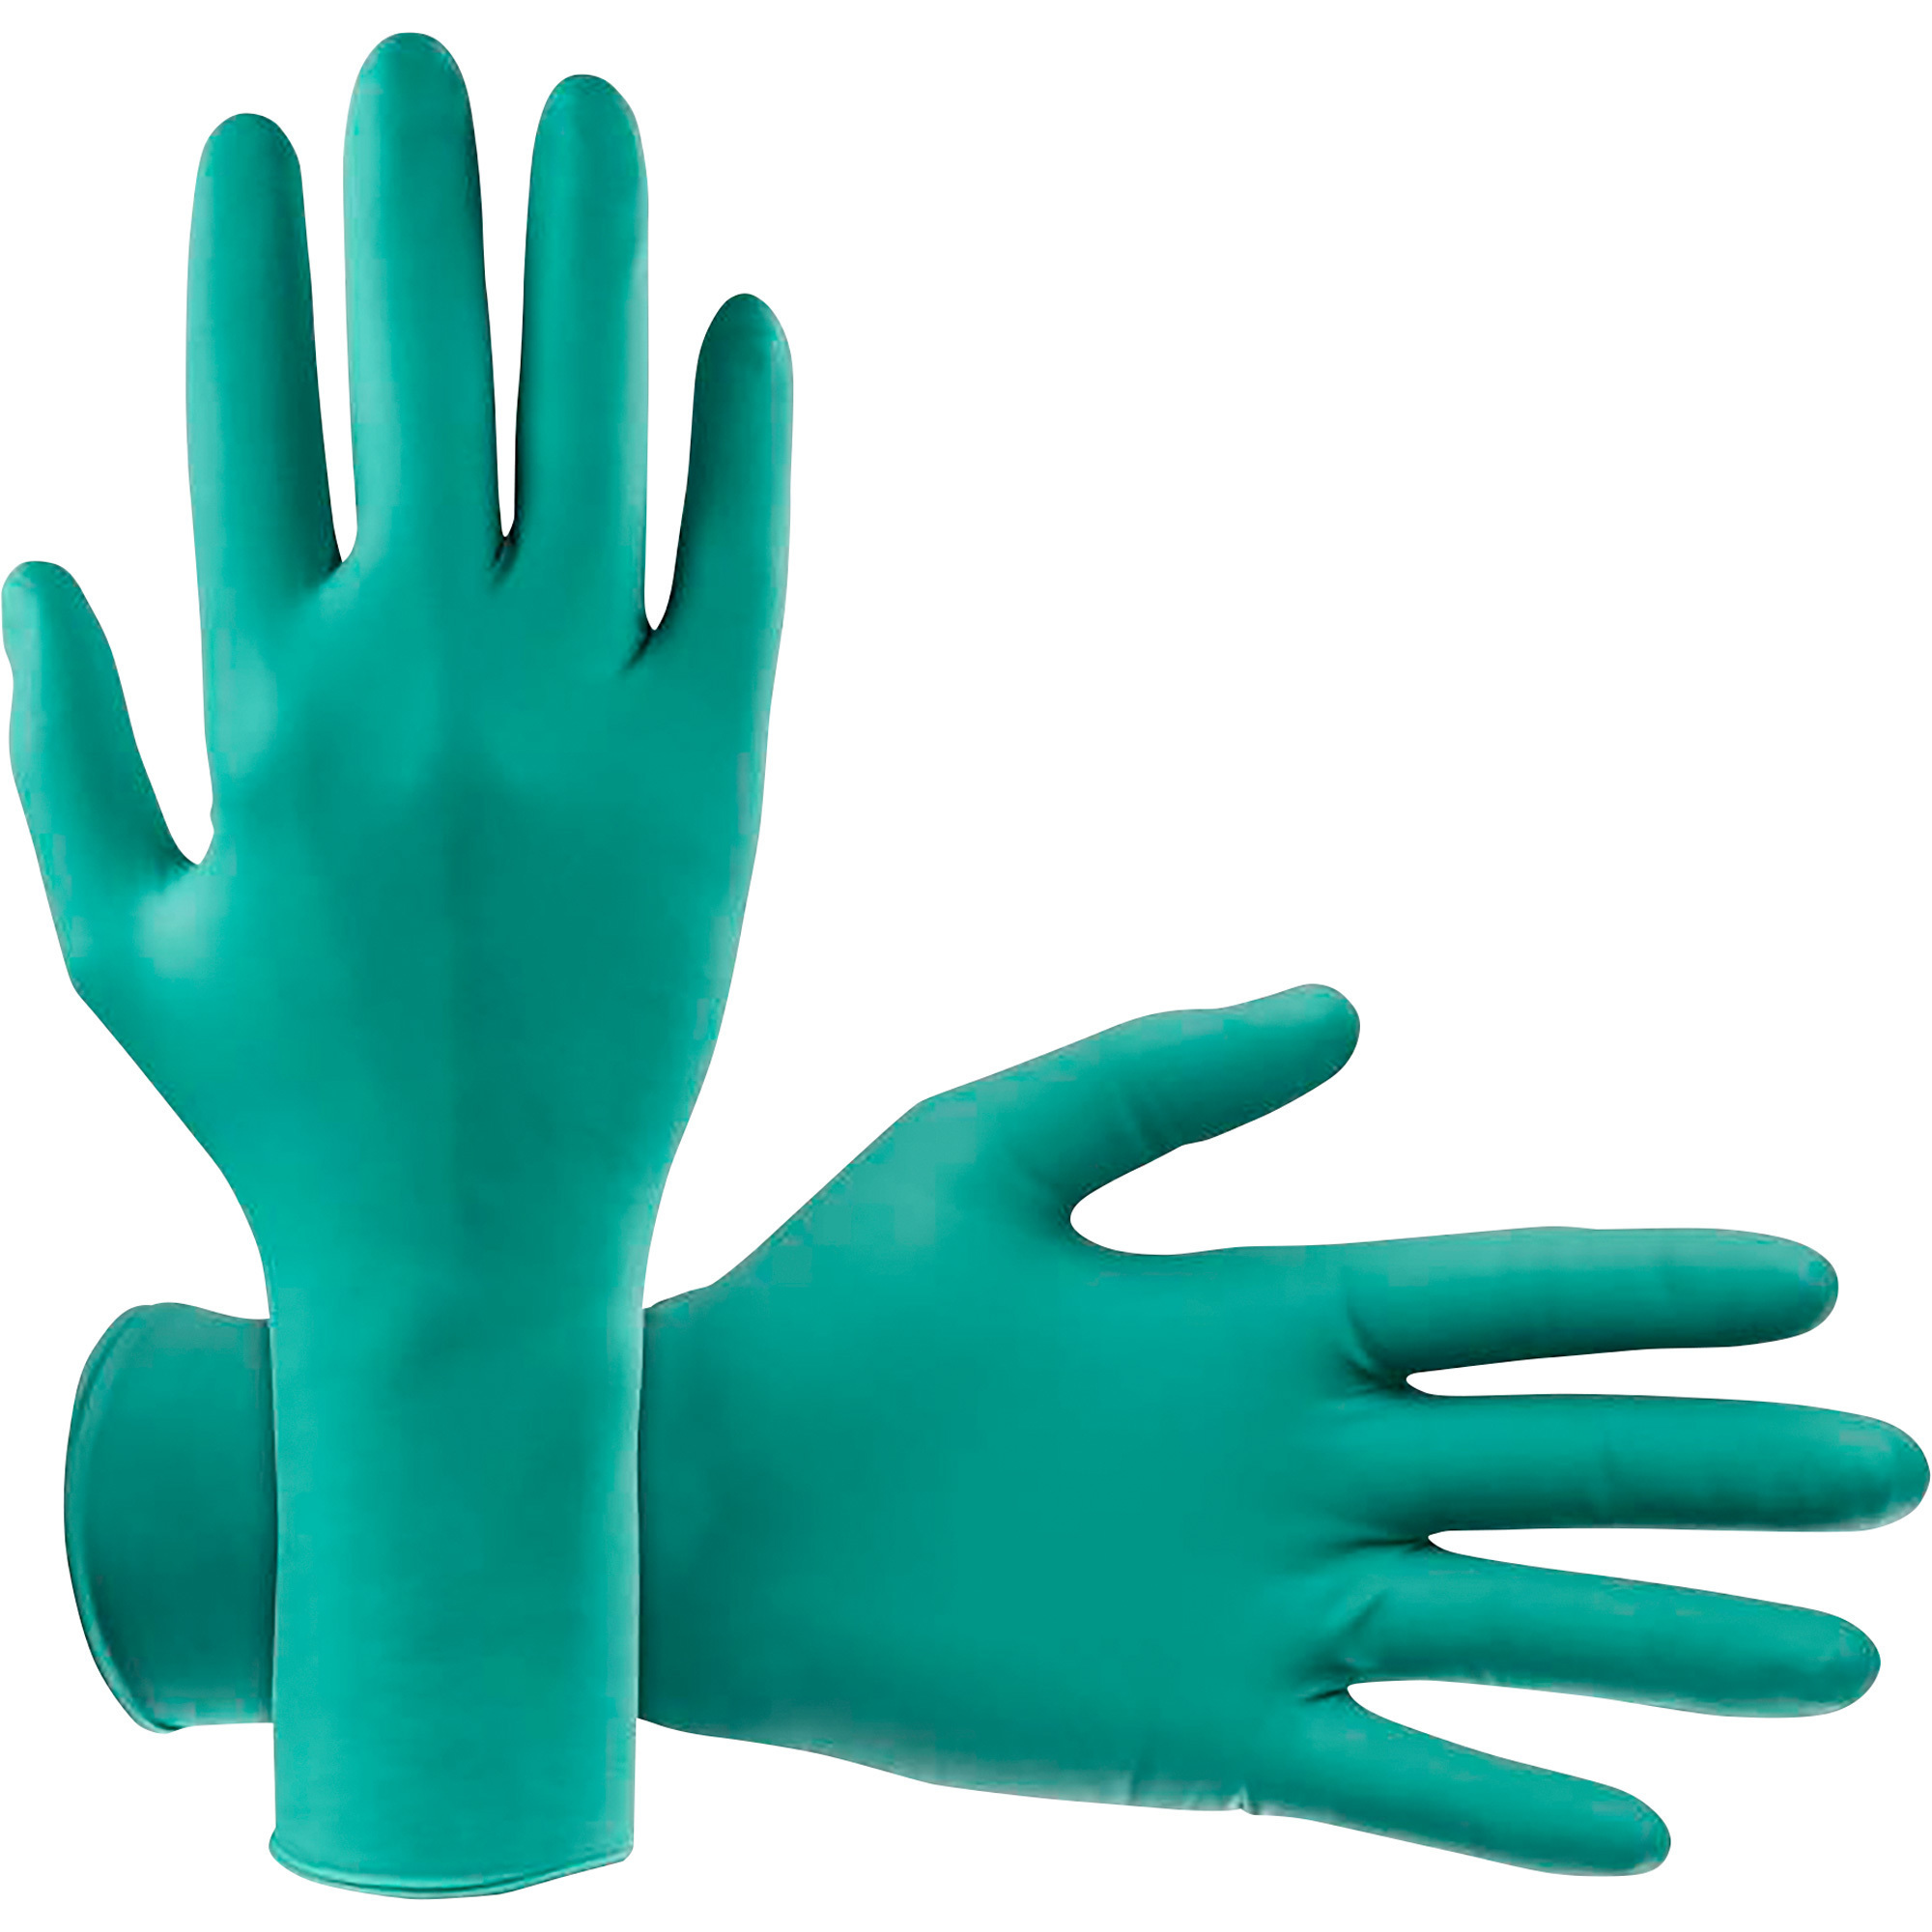 Chem Defender Premium Chemical-Resistant Disposable Safety Gloves with Extended Cuff, 50-Pack, Green, Large, Model 66593